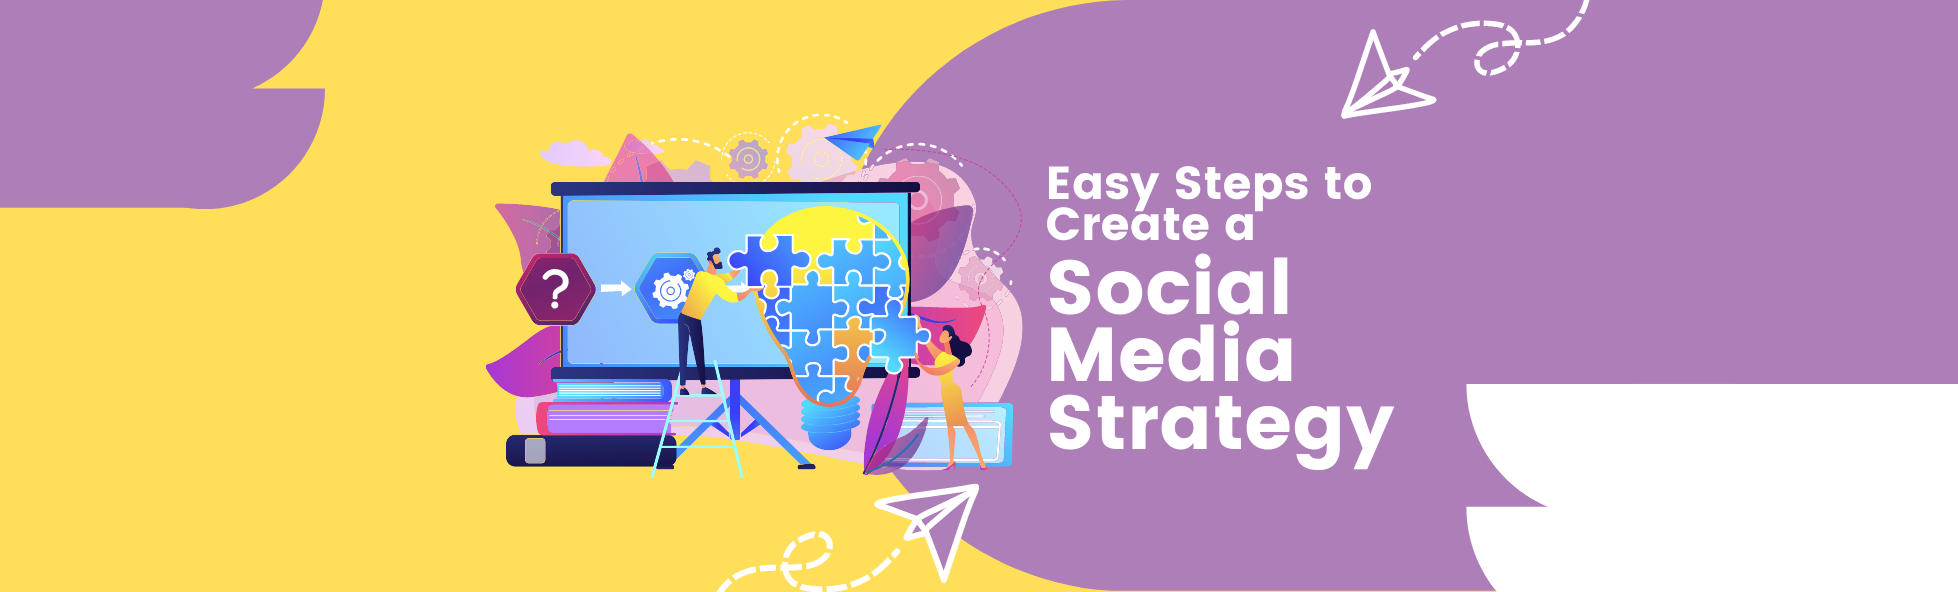 Create A Social Media Strategy in 5 Easy Steps